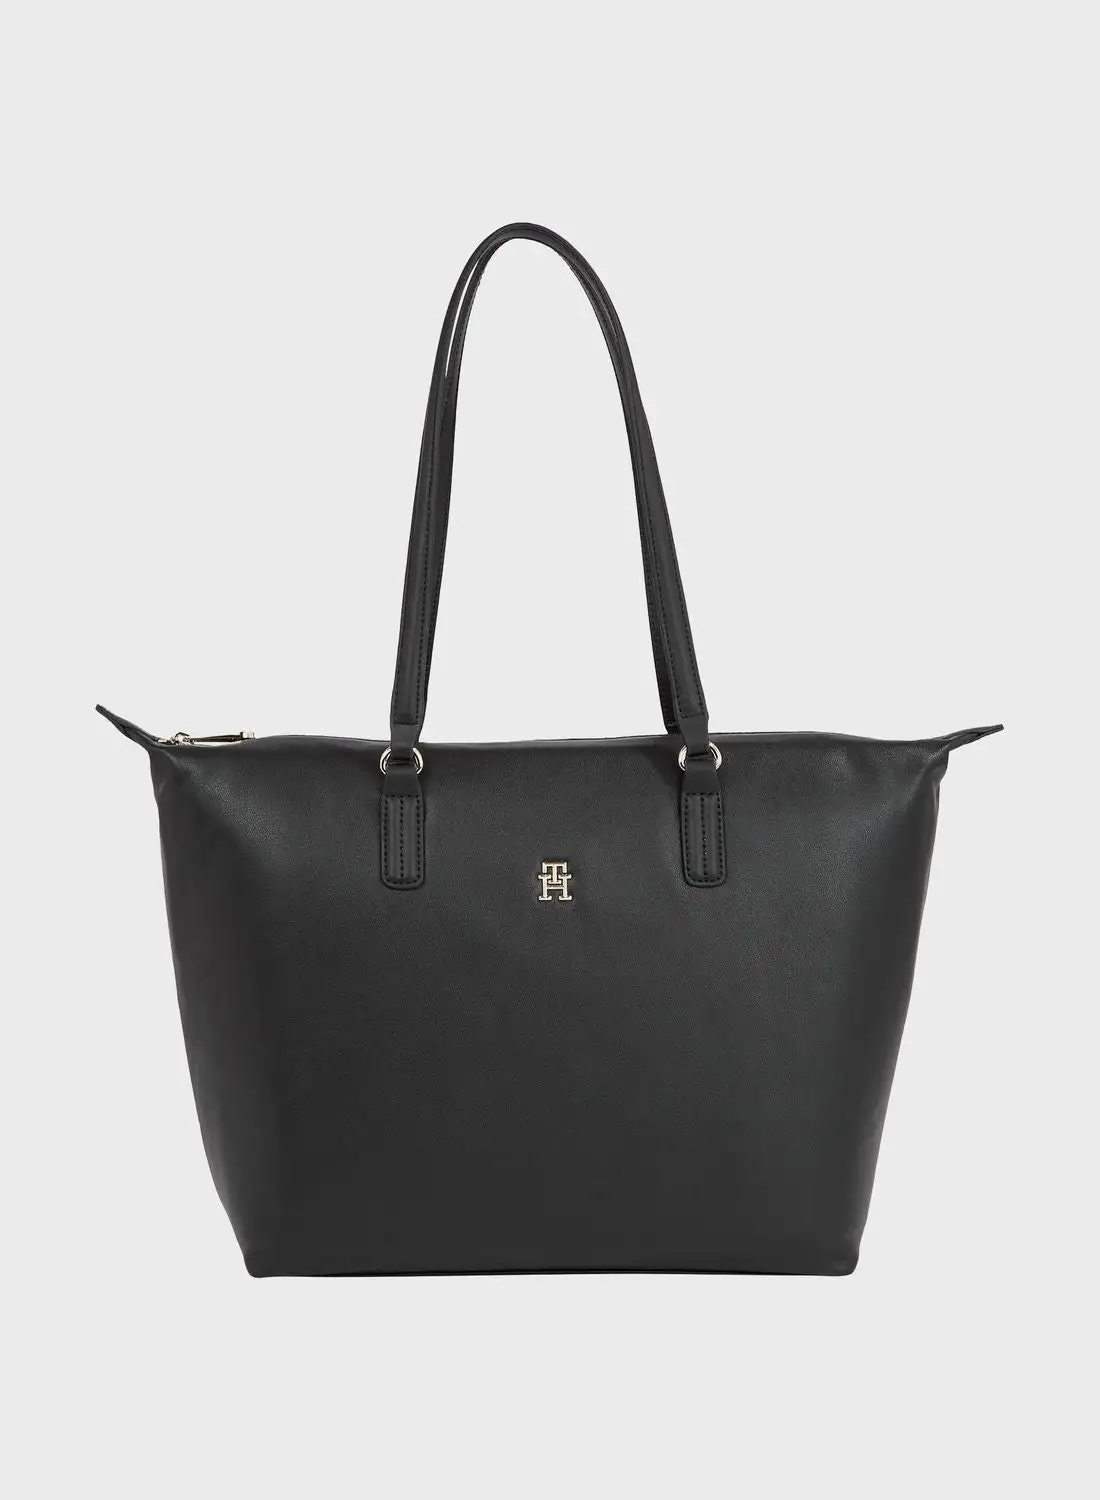 TOMMY HILFIGER Poppy Top Handle Tote Bag